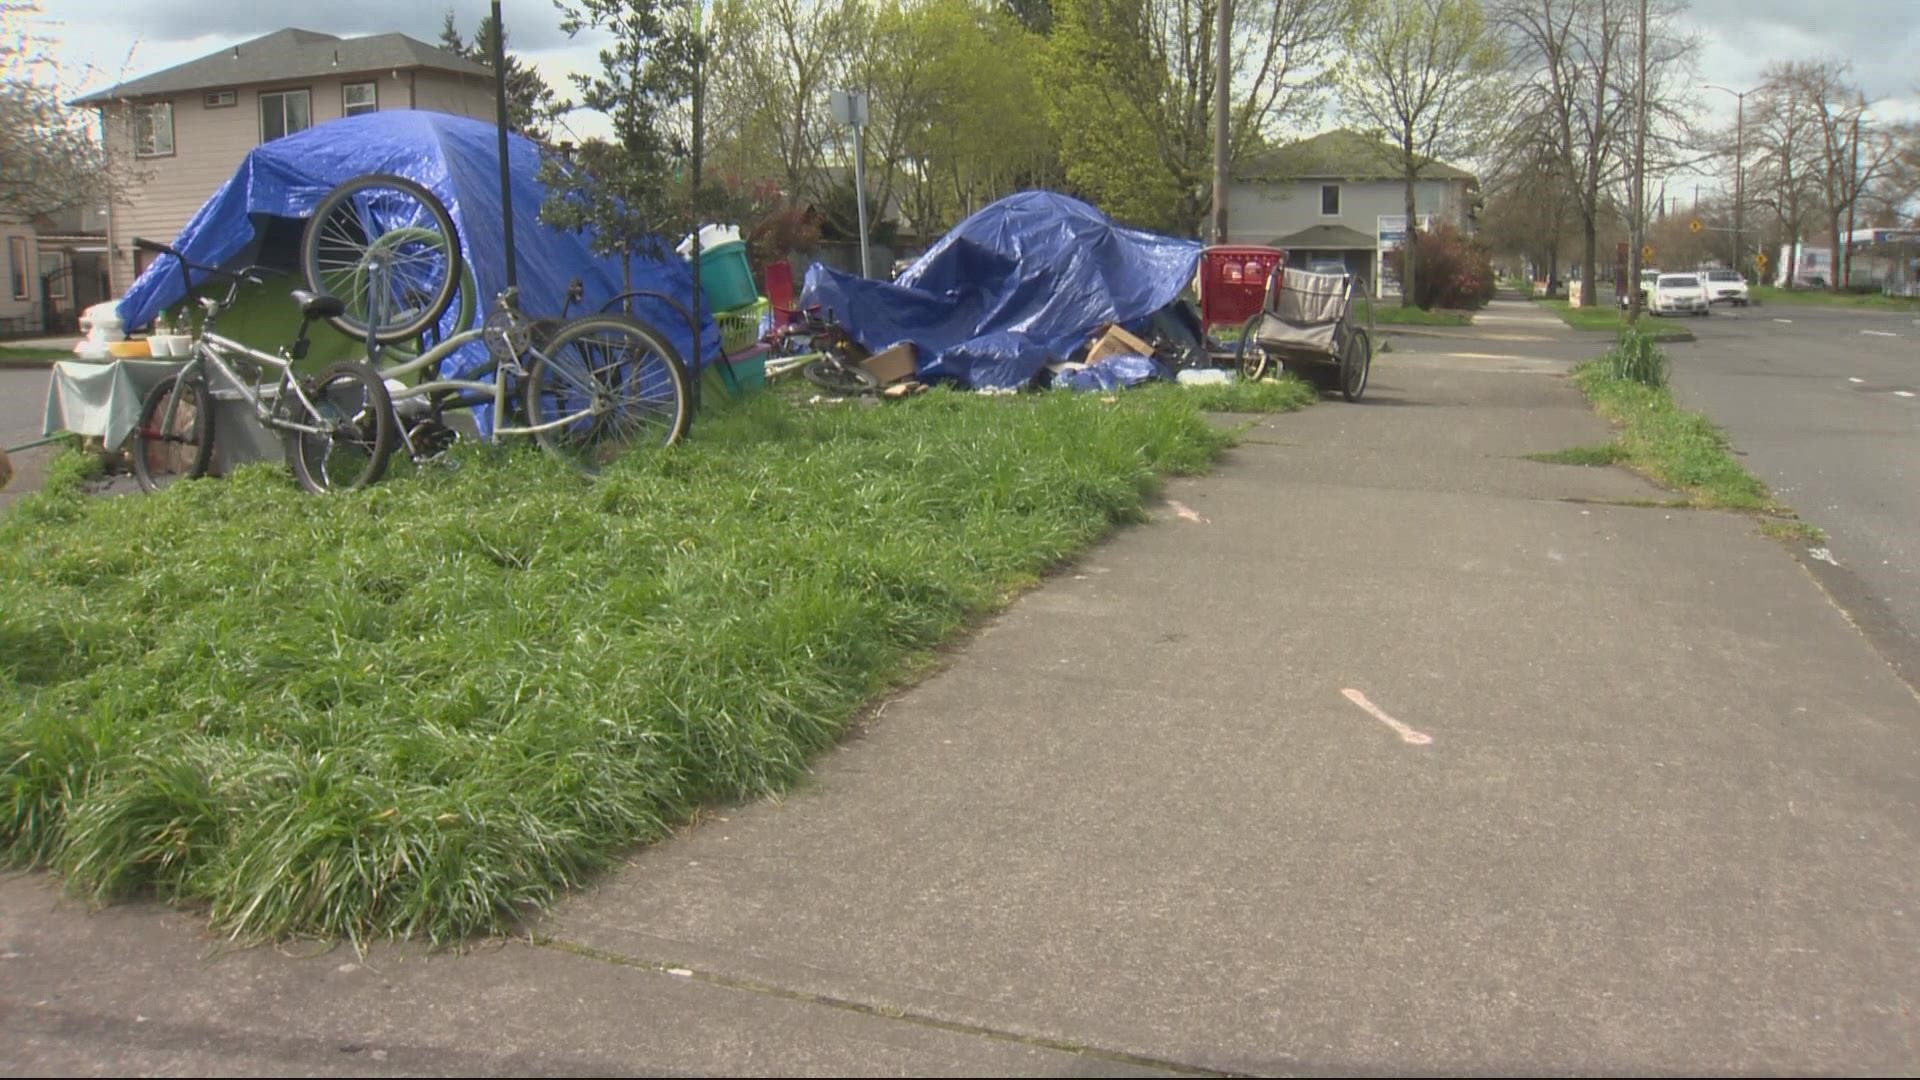 In February, Mayor Ted Wheeler announced an emergency declaration to clear homeless camps from dangerous roadways. Since then, about 50 sites have been cleared.